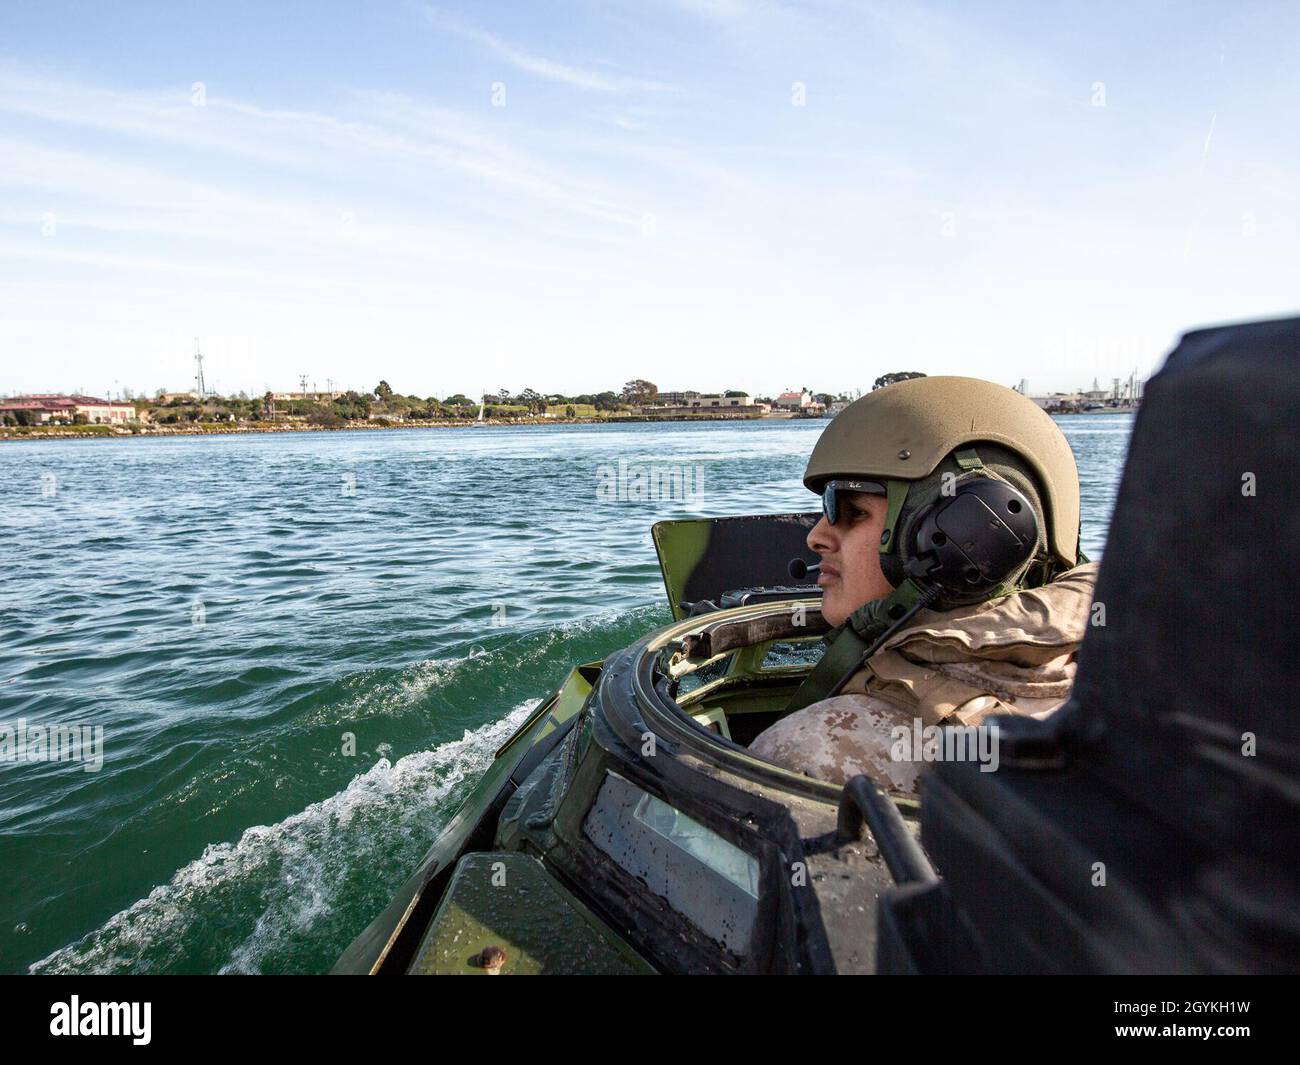 U.S. Marine Corps Sgt. Salomon Segura, an assault amphibious vehicle section leader with 3rd Assault Amphibian Battalion, drives an AAV-P7/A1 assault amphibious vehicle in the water during Exercise Iron Fist 2020 on Marine Corps Base Camp Pendleton, California, Jan. 19. Exercise Iron Fist provides realistic, relevant training necessary for effective combined military operations. (U.S. Marine Corps photo by Lance Cpl. Britany Rowlett) Stock Photo